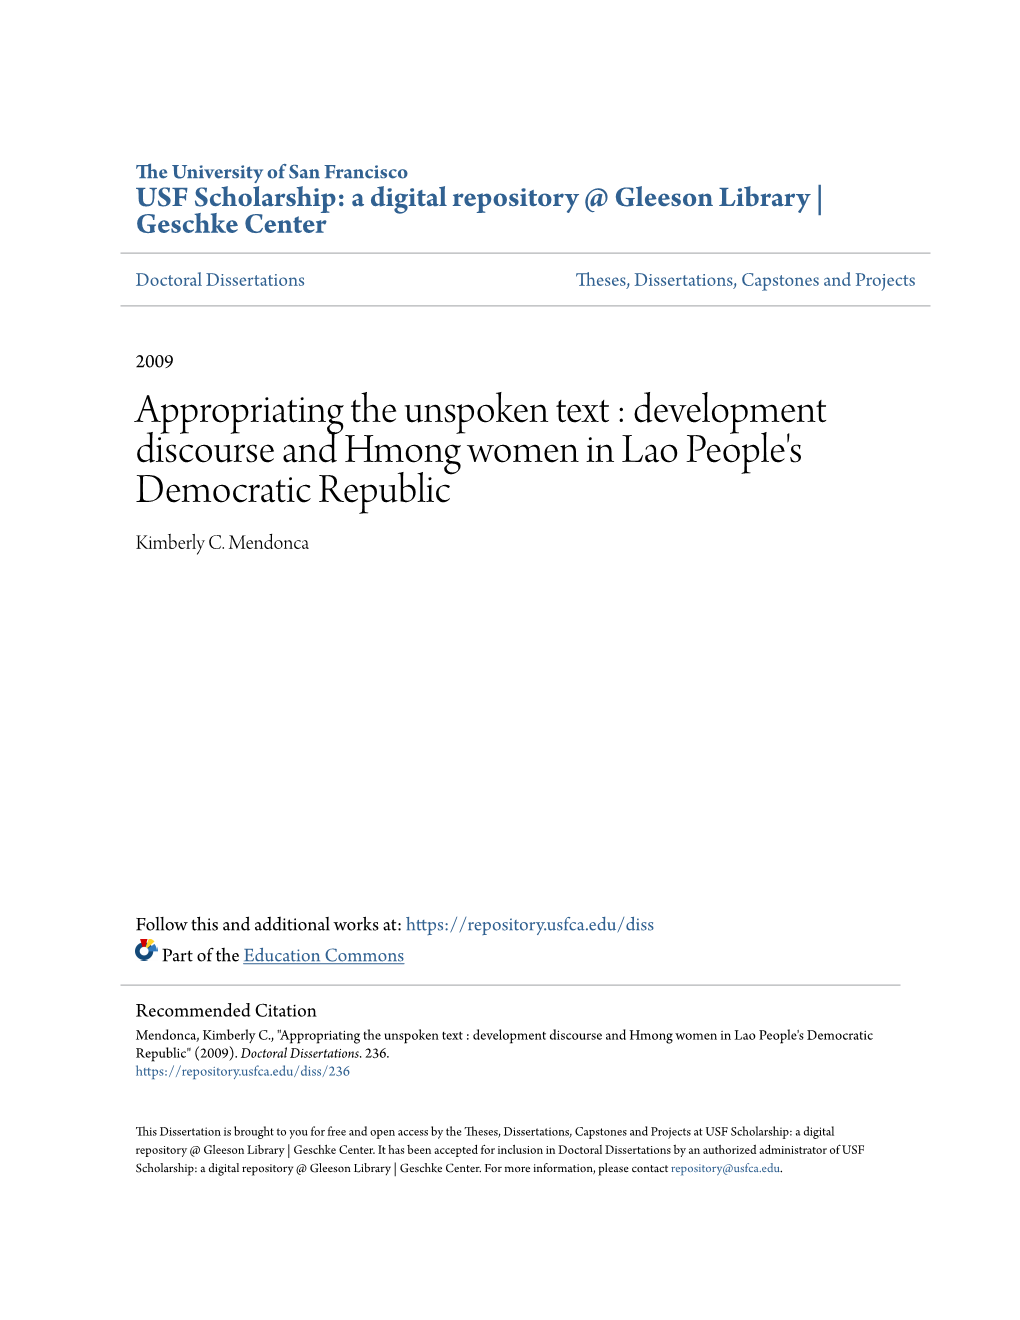 Development Discourse and Hmong Women in Lao People's Democratic Republic Kimberly C